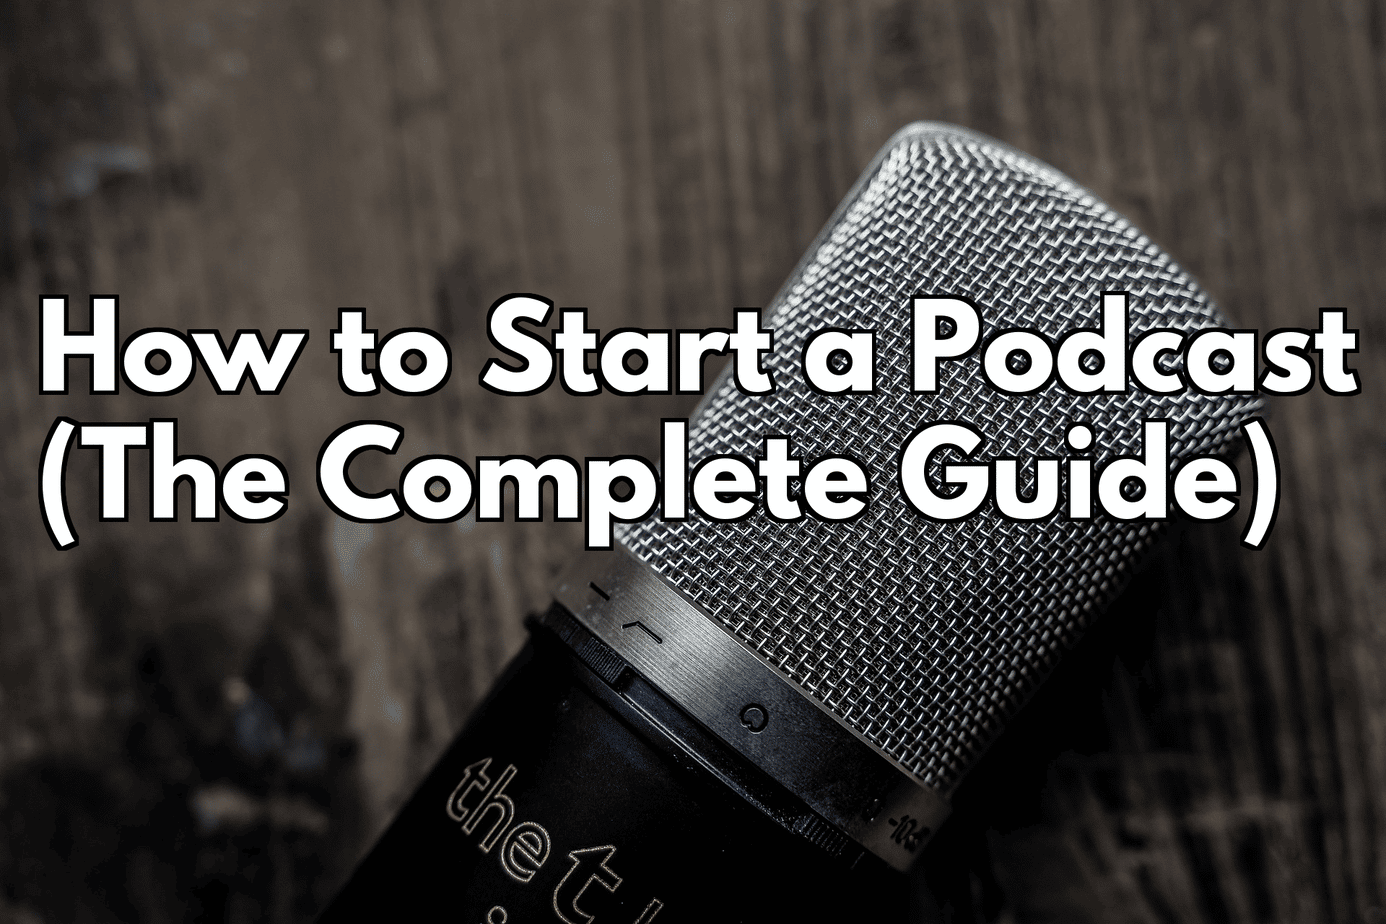 How to Start a Podcast: The Complete Guide